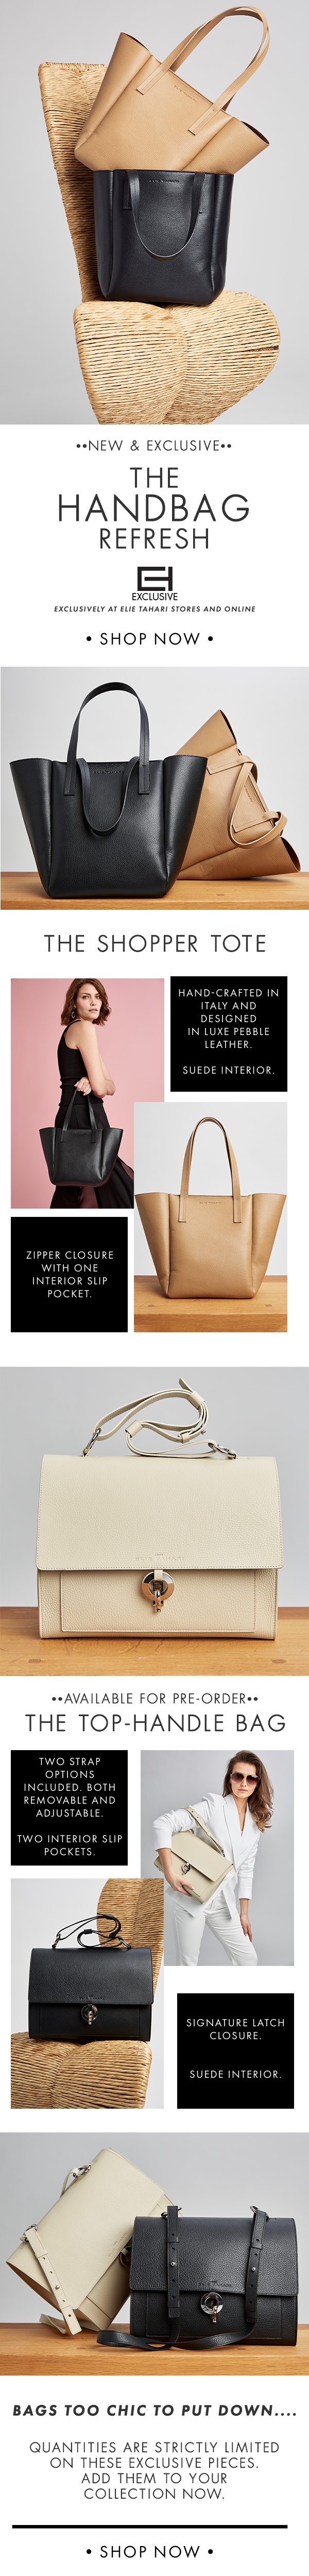 Handbags to pair with your everyday look